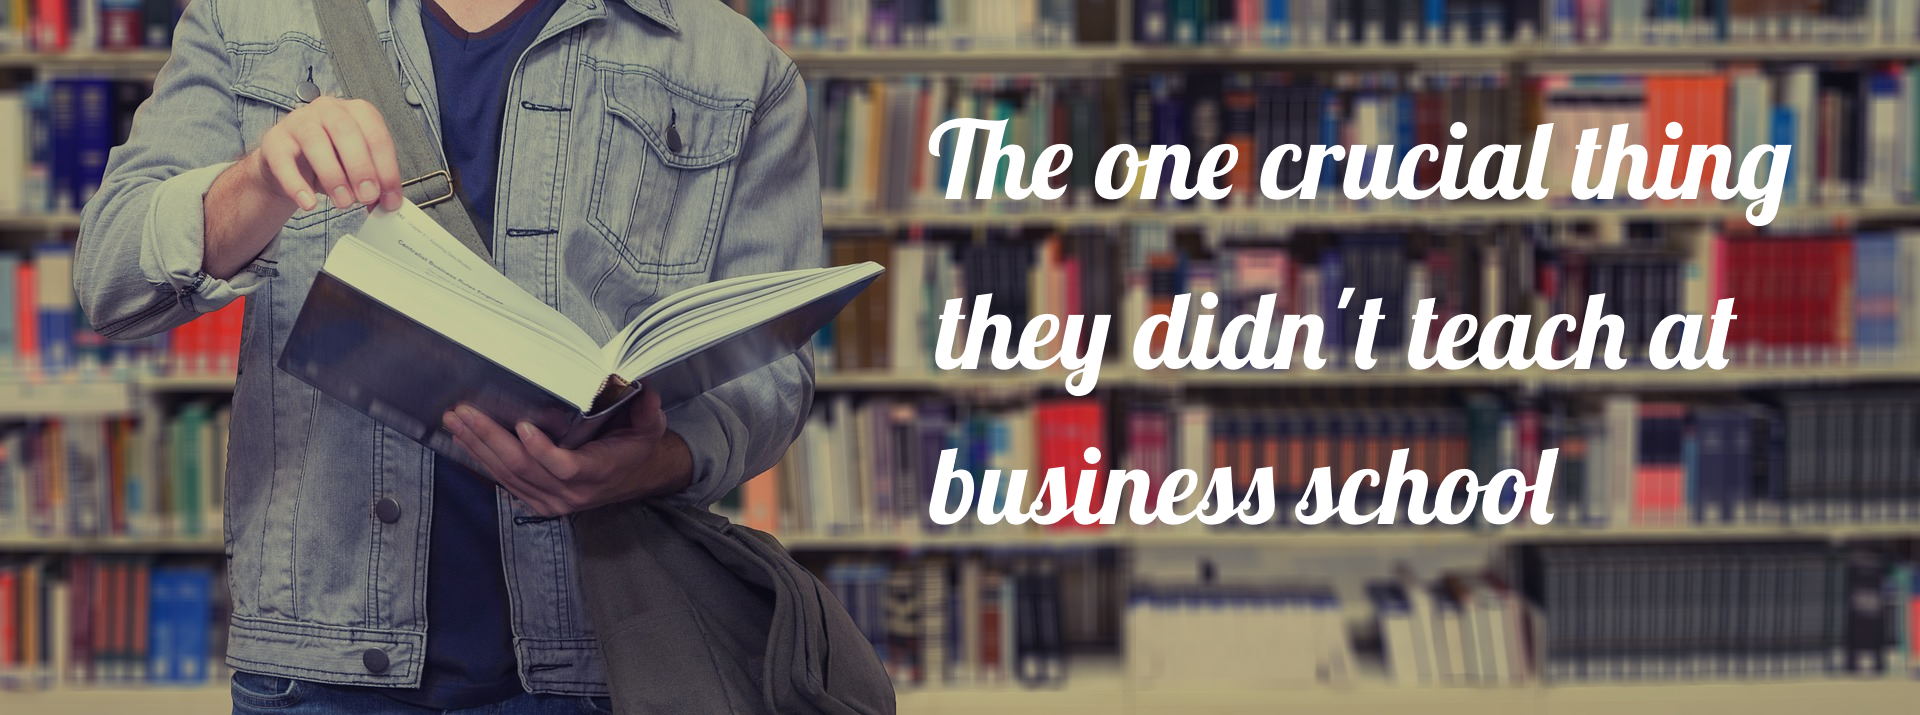 The one crucial thing they didn’t teach at business school